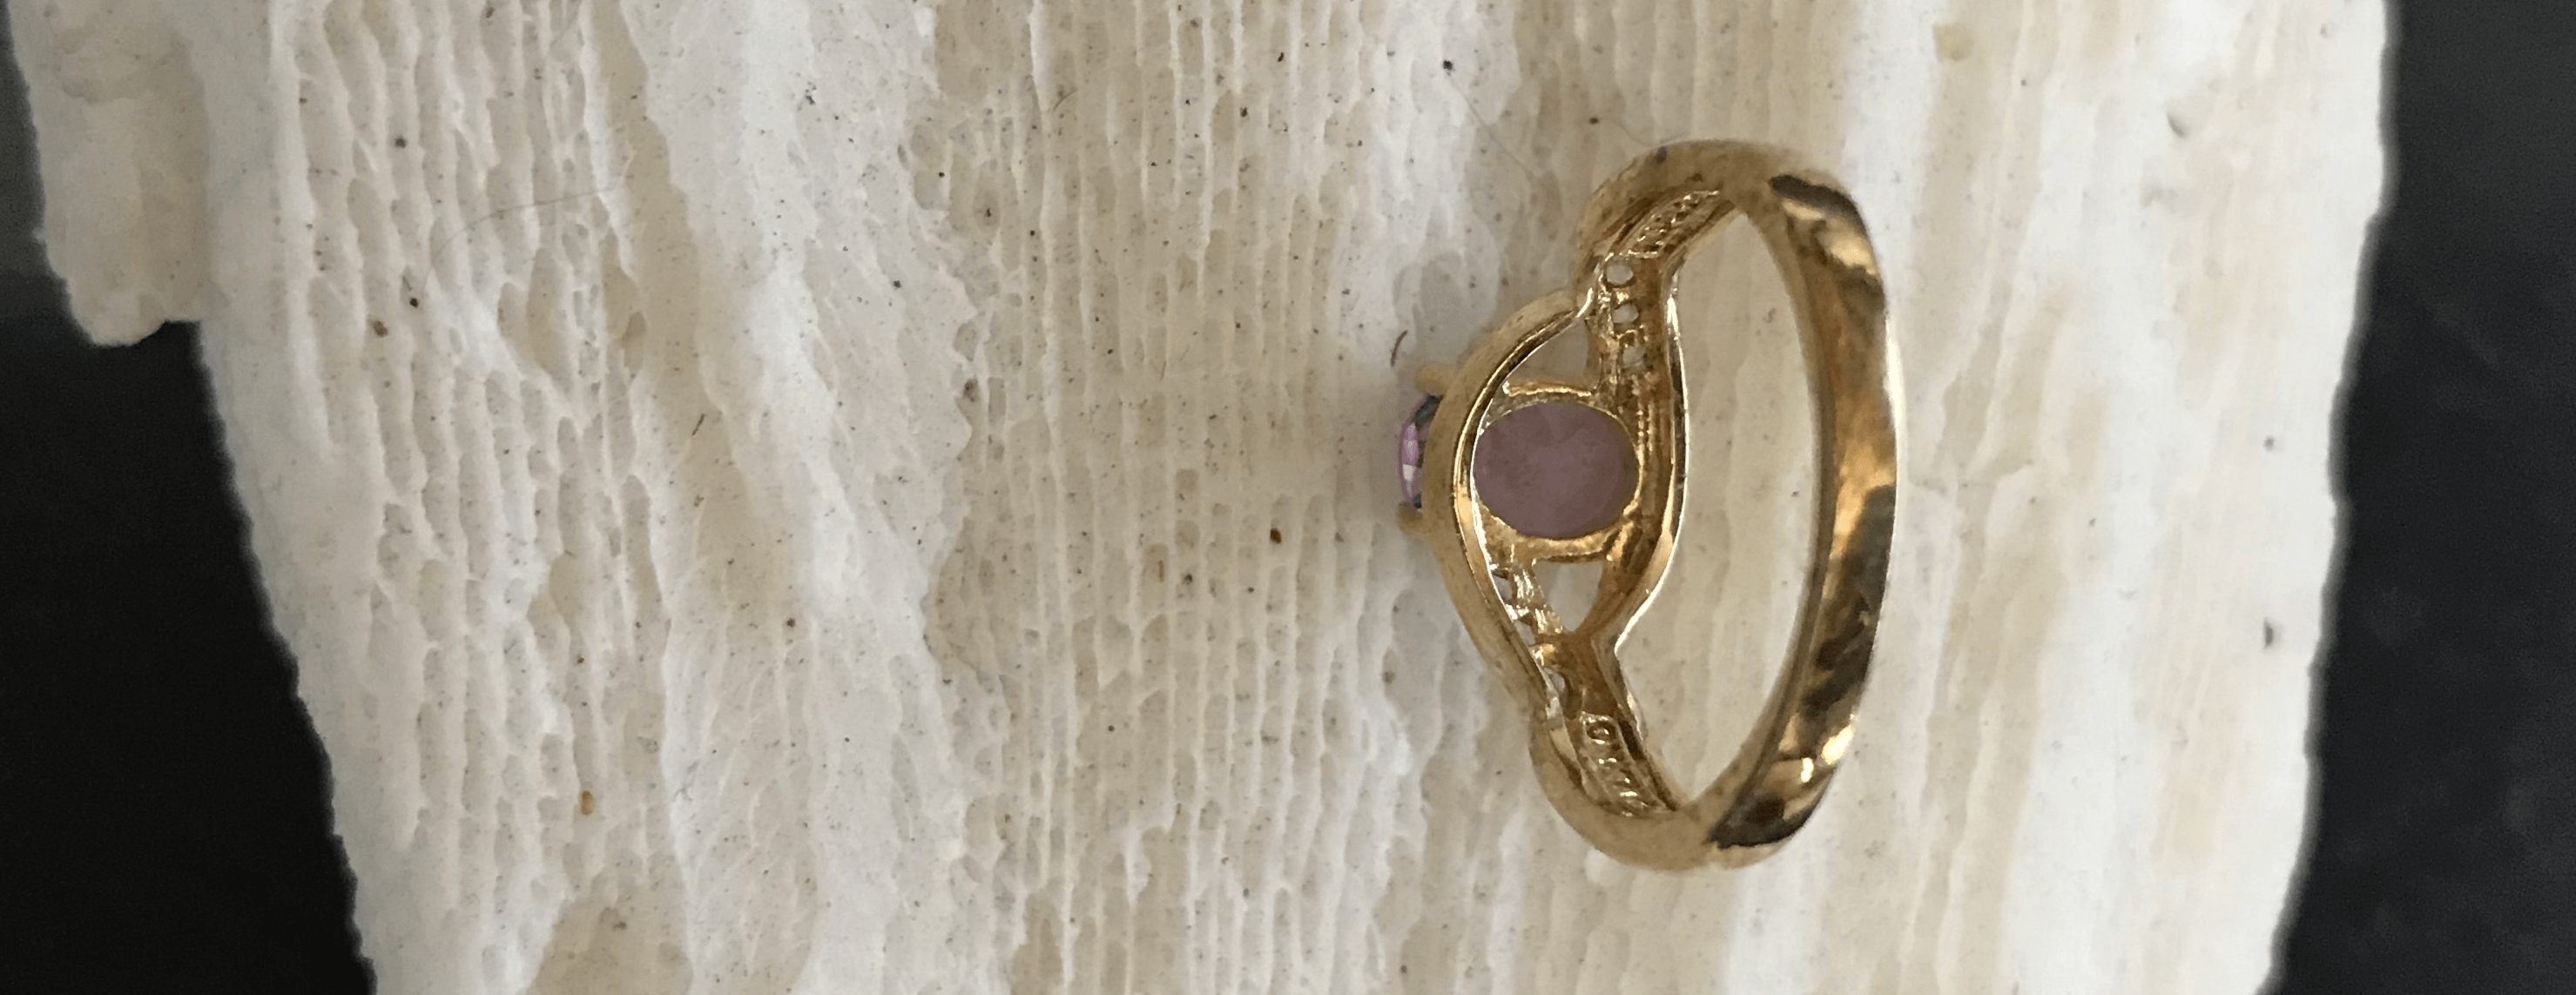 18K Gold Over Sterling Silver Amethyst Ring-Size 7 - Shop Thrifty Treasures